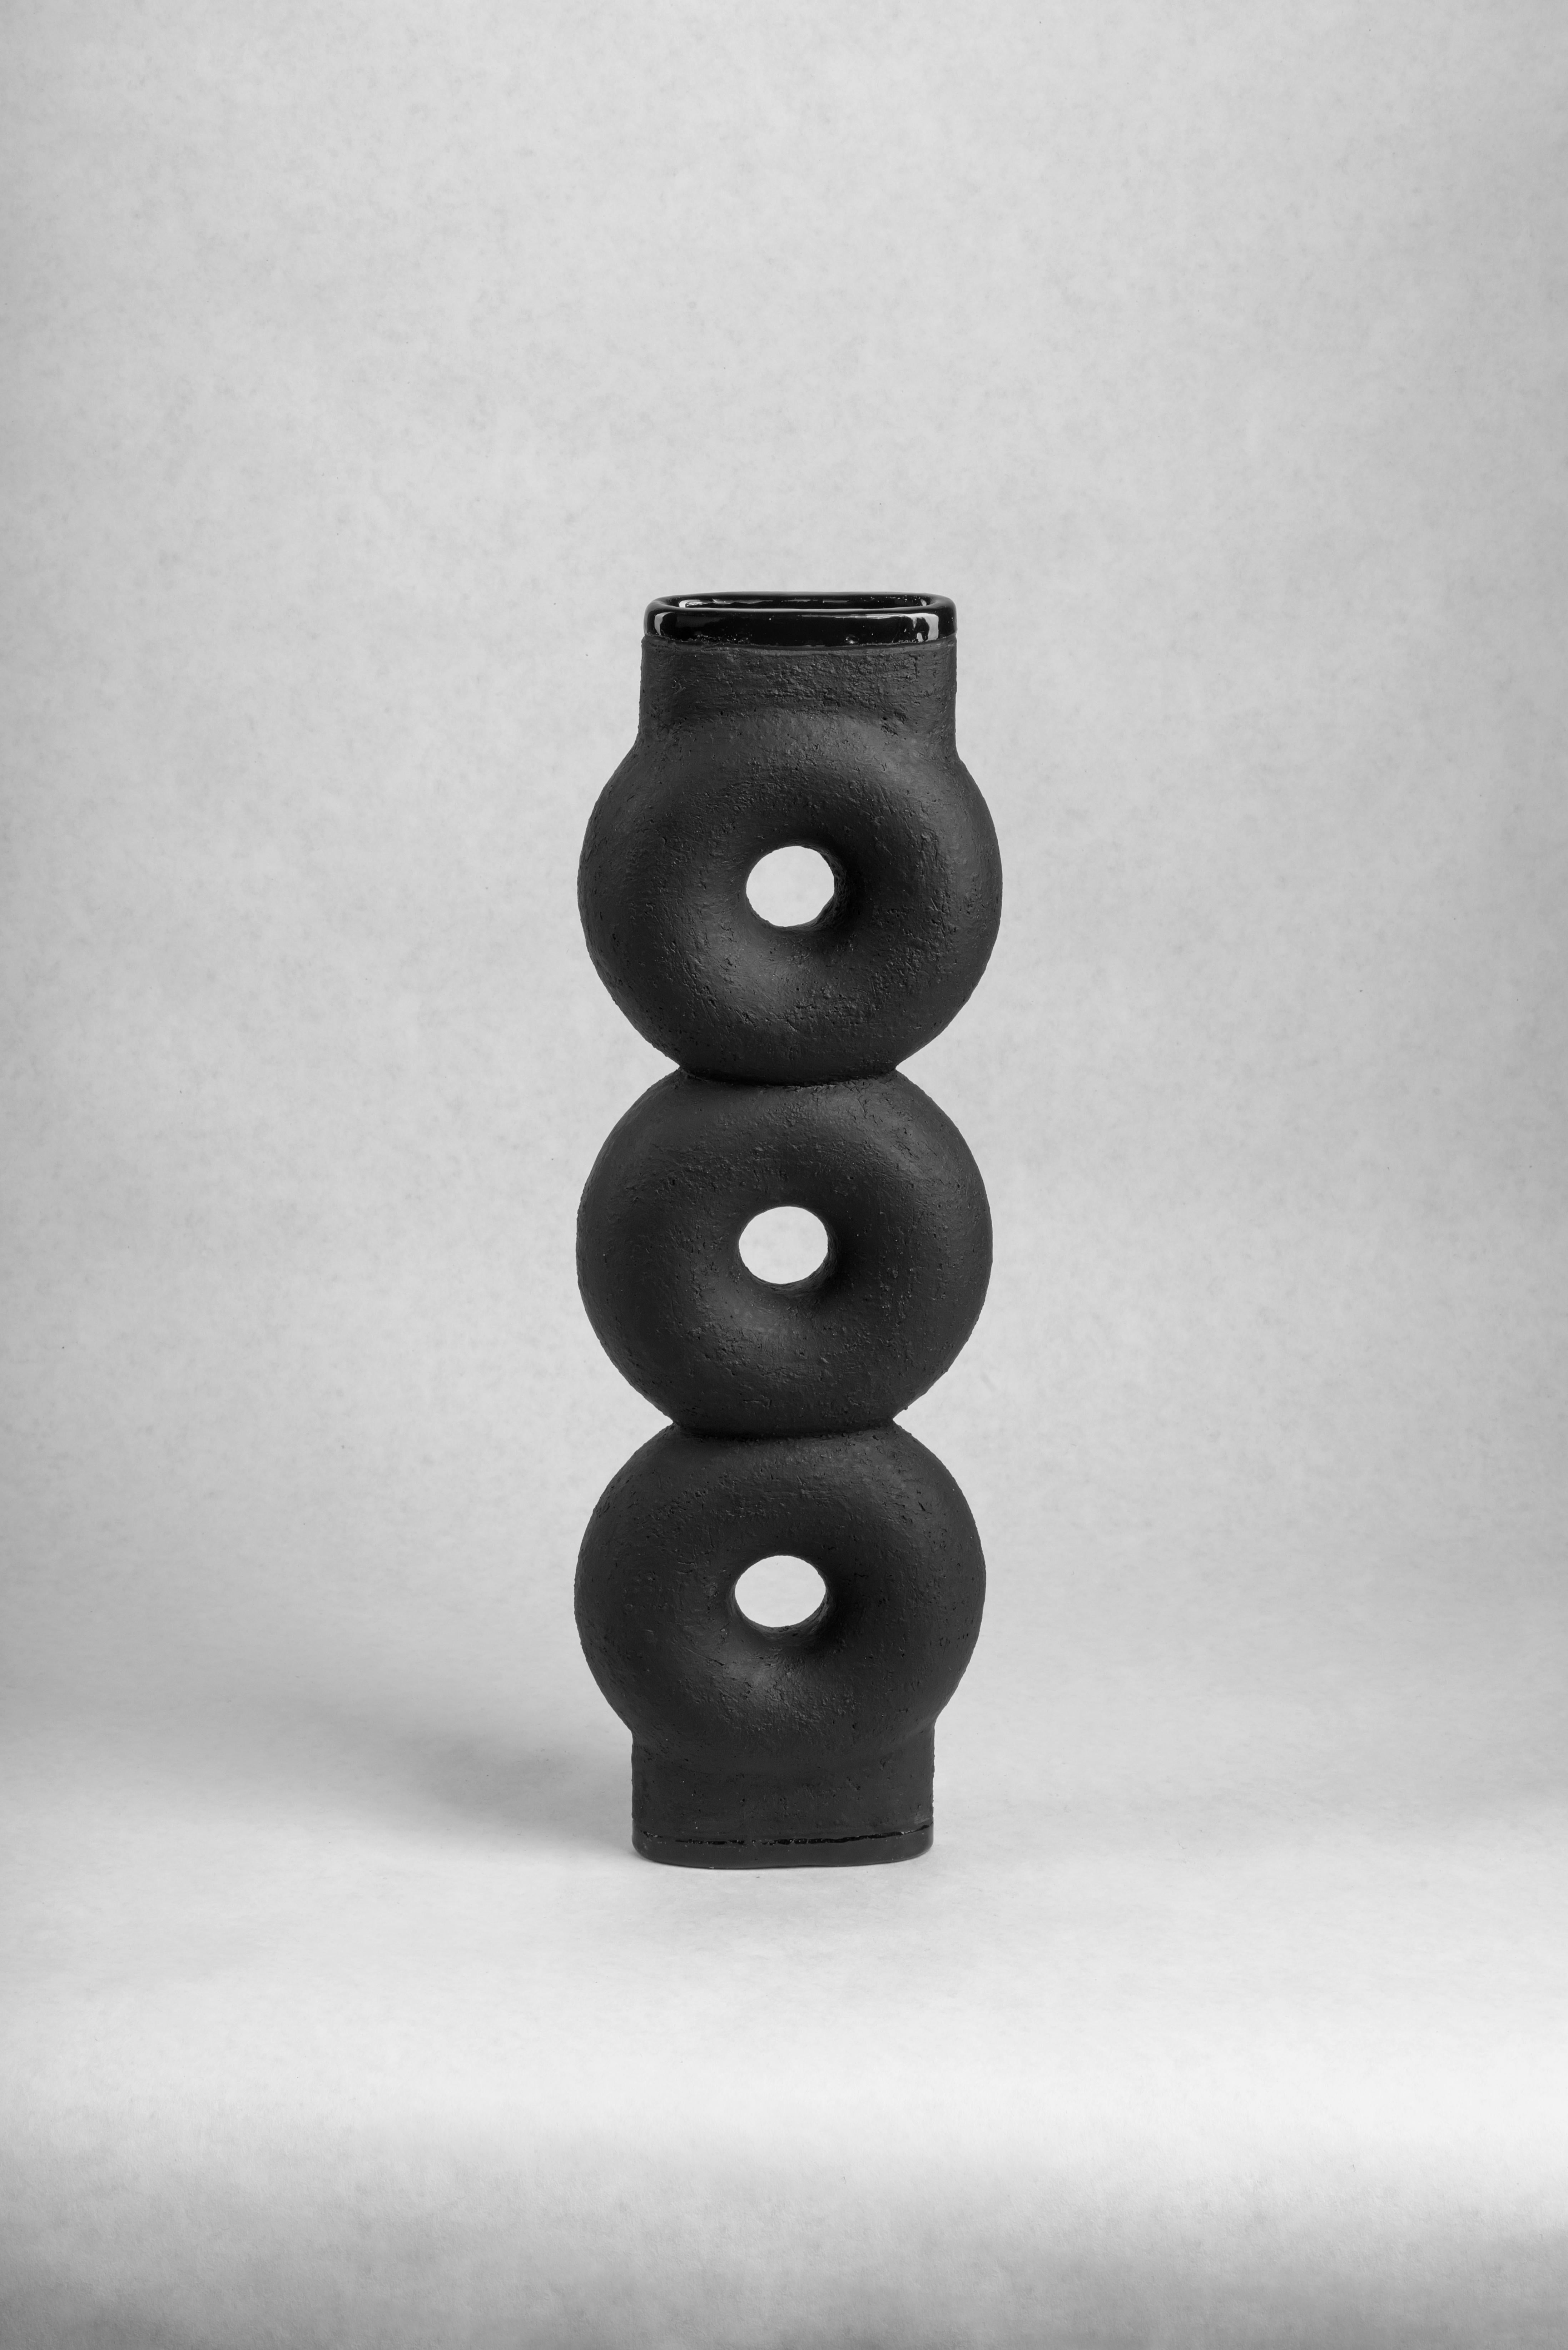 Sculpted ceramic vase by FAINA
Design: Victoriya Yakusha
Material: clay / ceramics
Dimensions: 14 x 5 x H 43.5 cm


The vase is part of a series of 5 vases, the set of vases consists of:

1. Vase on three legs height 500 x width 200 x Length 430